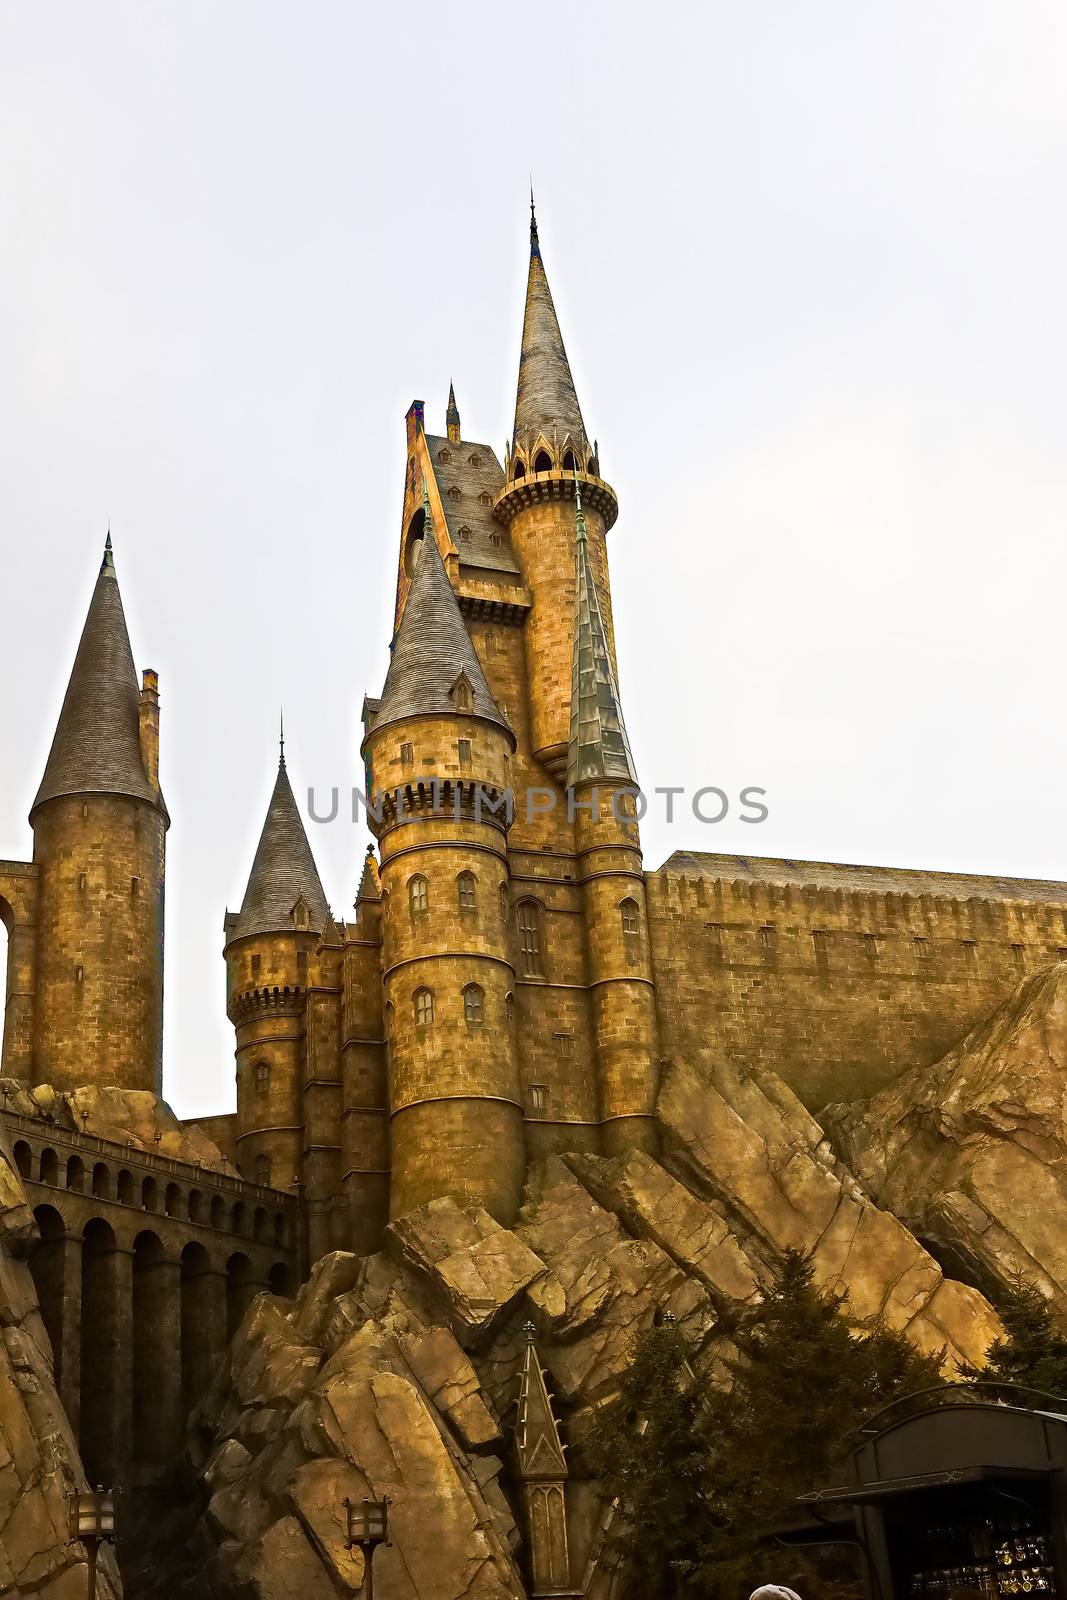 Osaka, Japan - Dec 02, 2017: View of Hogwarts castle at the Wizarding World of Harry Potter in Universal Studios Japan. by USA-TARO